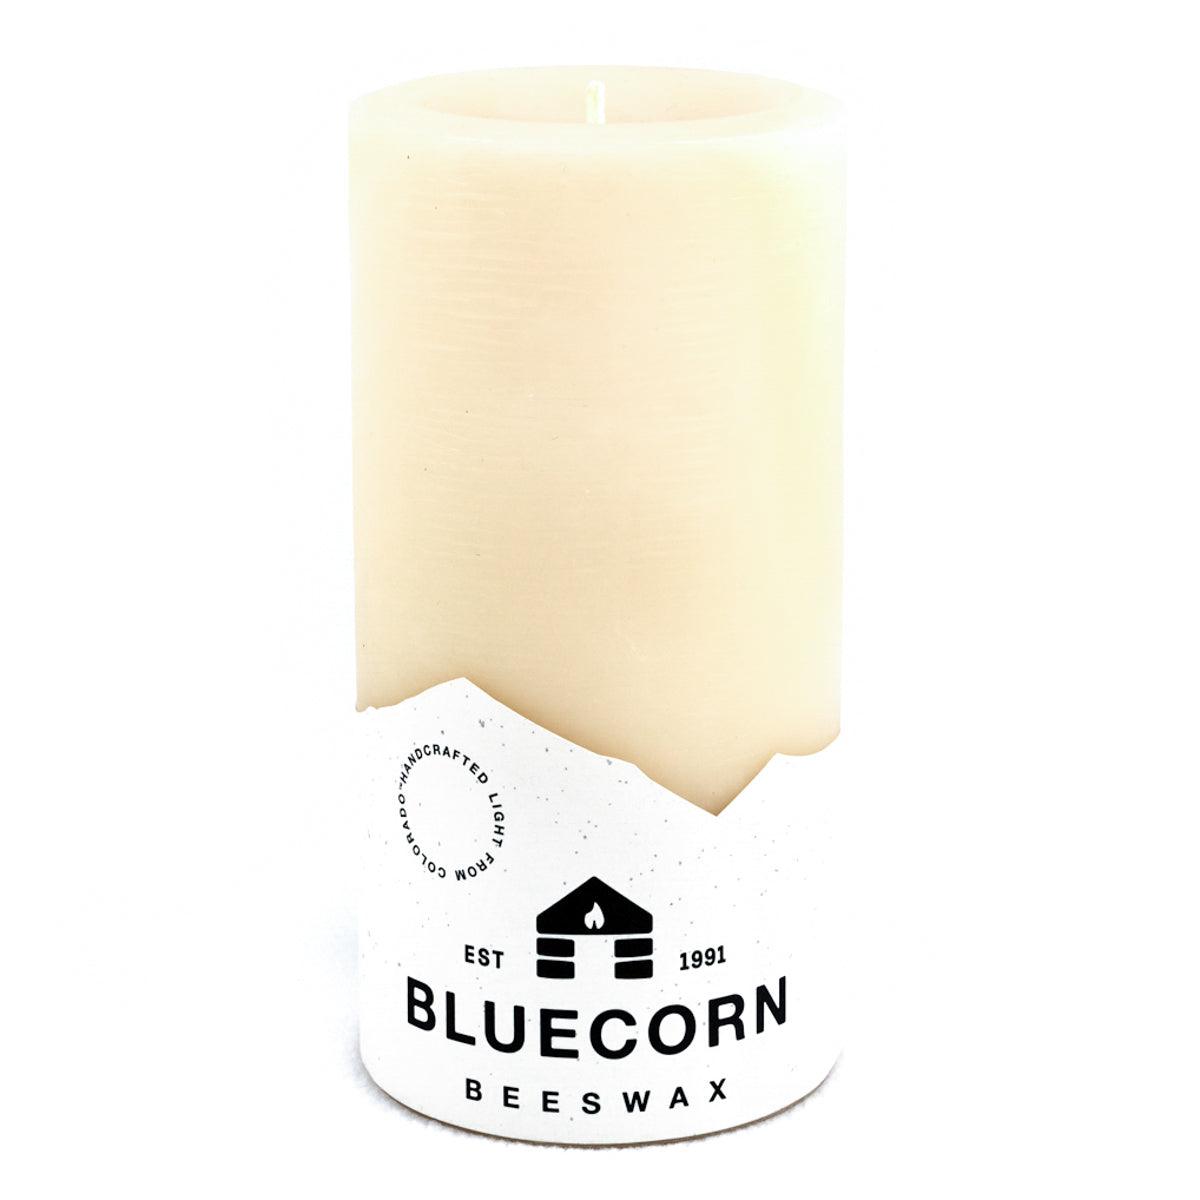 Bluecorn Beeswax 100% Pure Beeswax 3" x 6" Ivory Pillar Candle. Burn Time: 90 hours. Made with 100% Pure Beeswax, wax is white in color. Made with 100% pure cotton wick, no lead and paraffin free. Clean burning and non-toxic. Features Bluecorn Beeswax label printed on 100% recycled paper. Clearance items might have an odd blemish or air bubble, but will still burn beautifully.